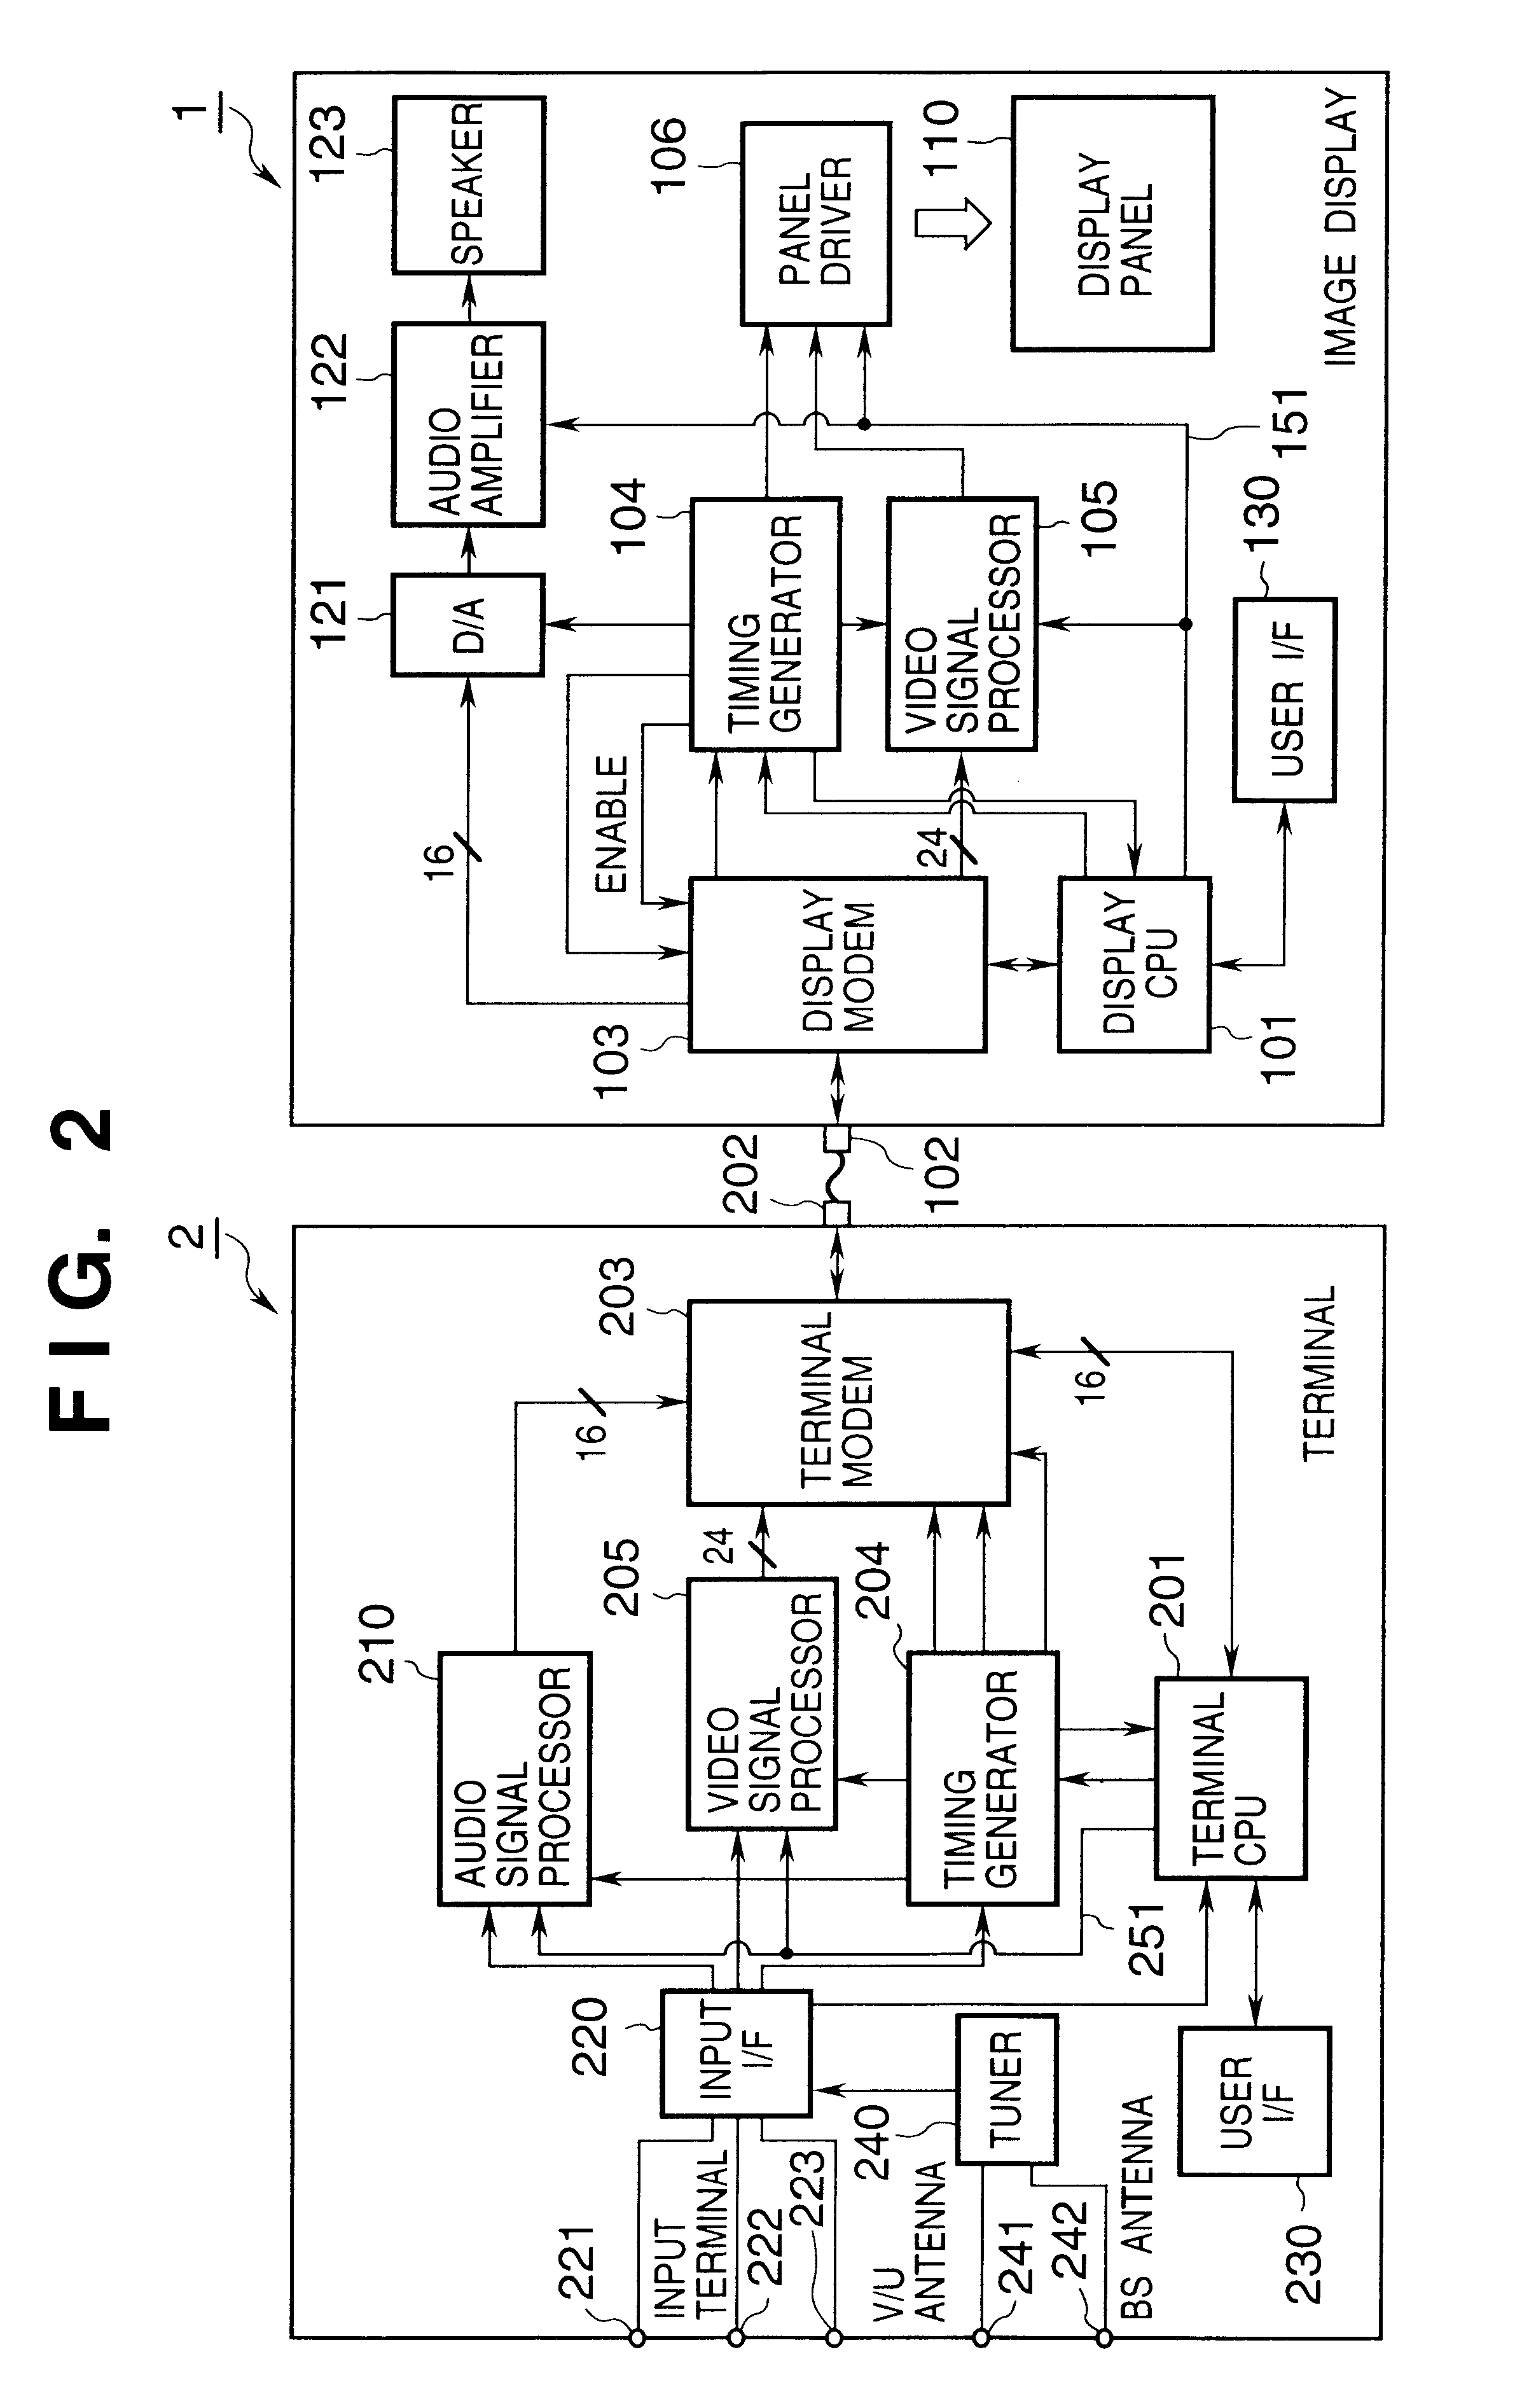 Image display apparatus control system and image display system control method